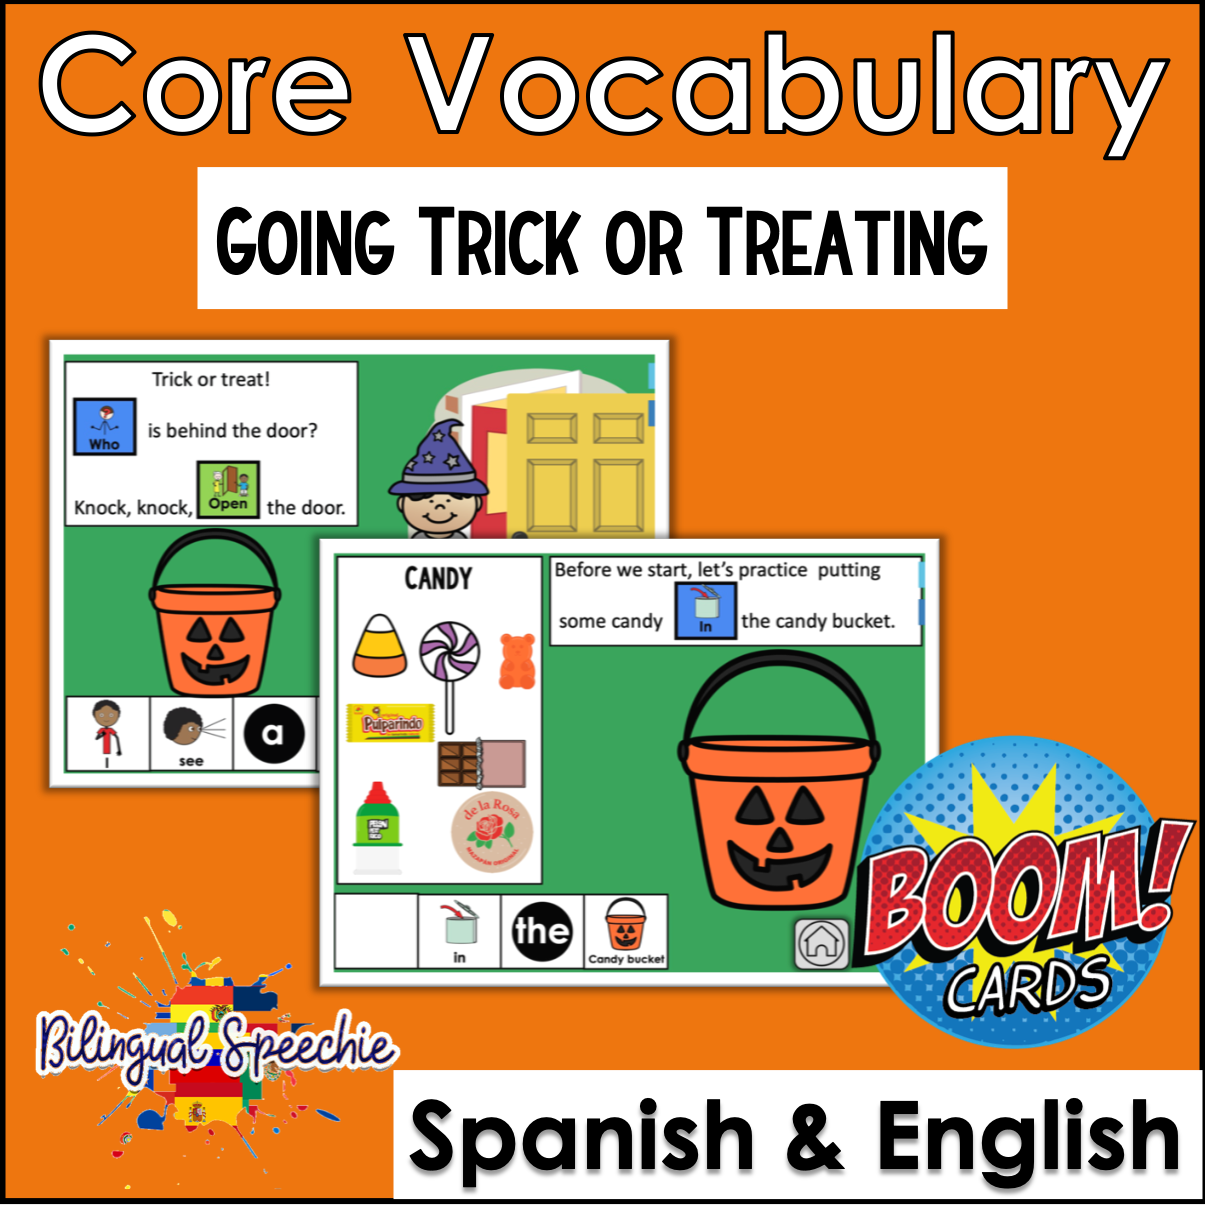 English & Spanish | Trick or Treating with Core Vocabulary